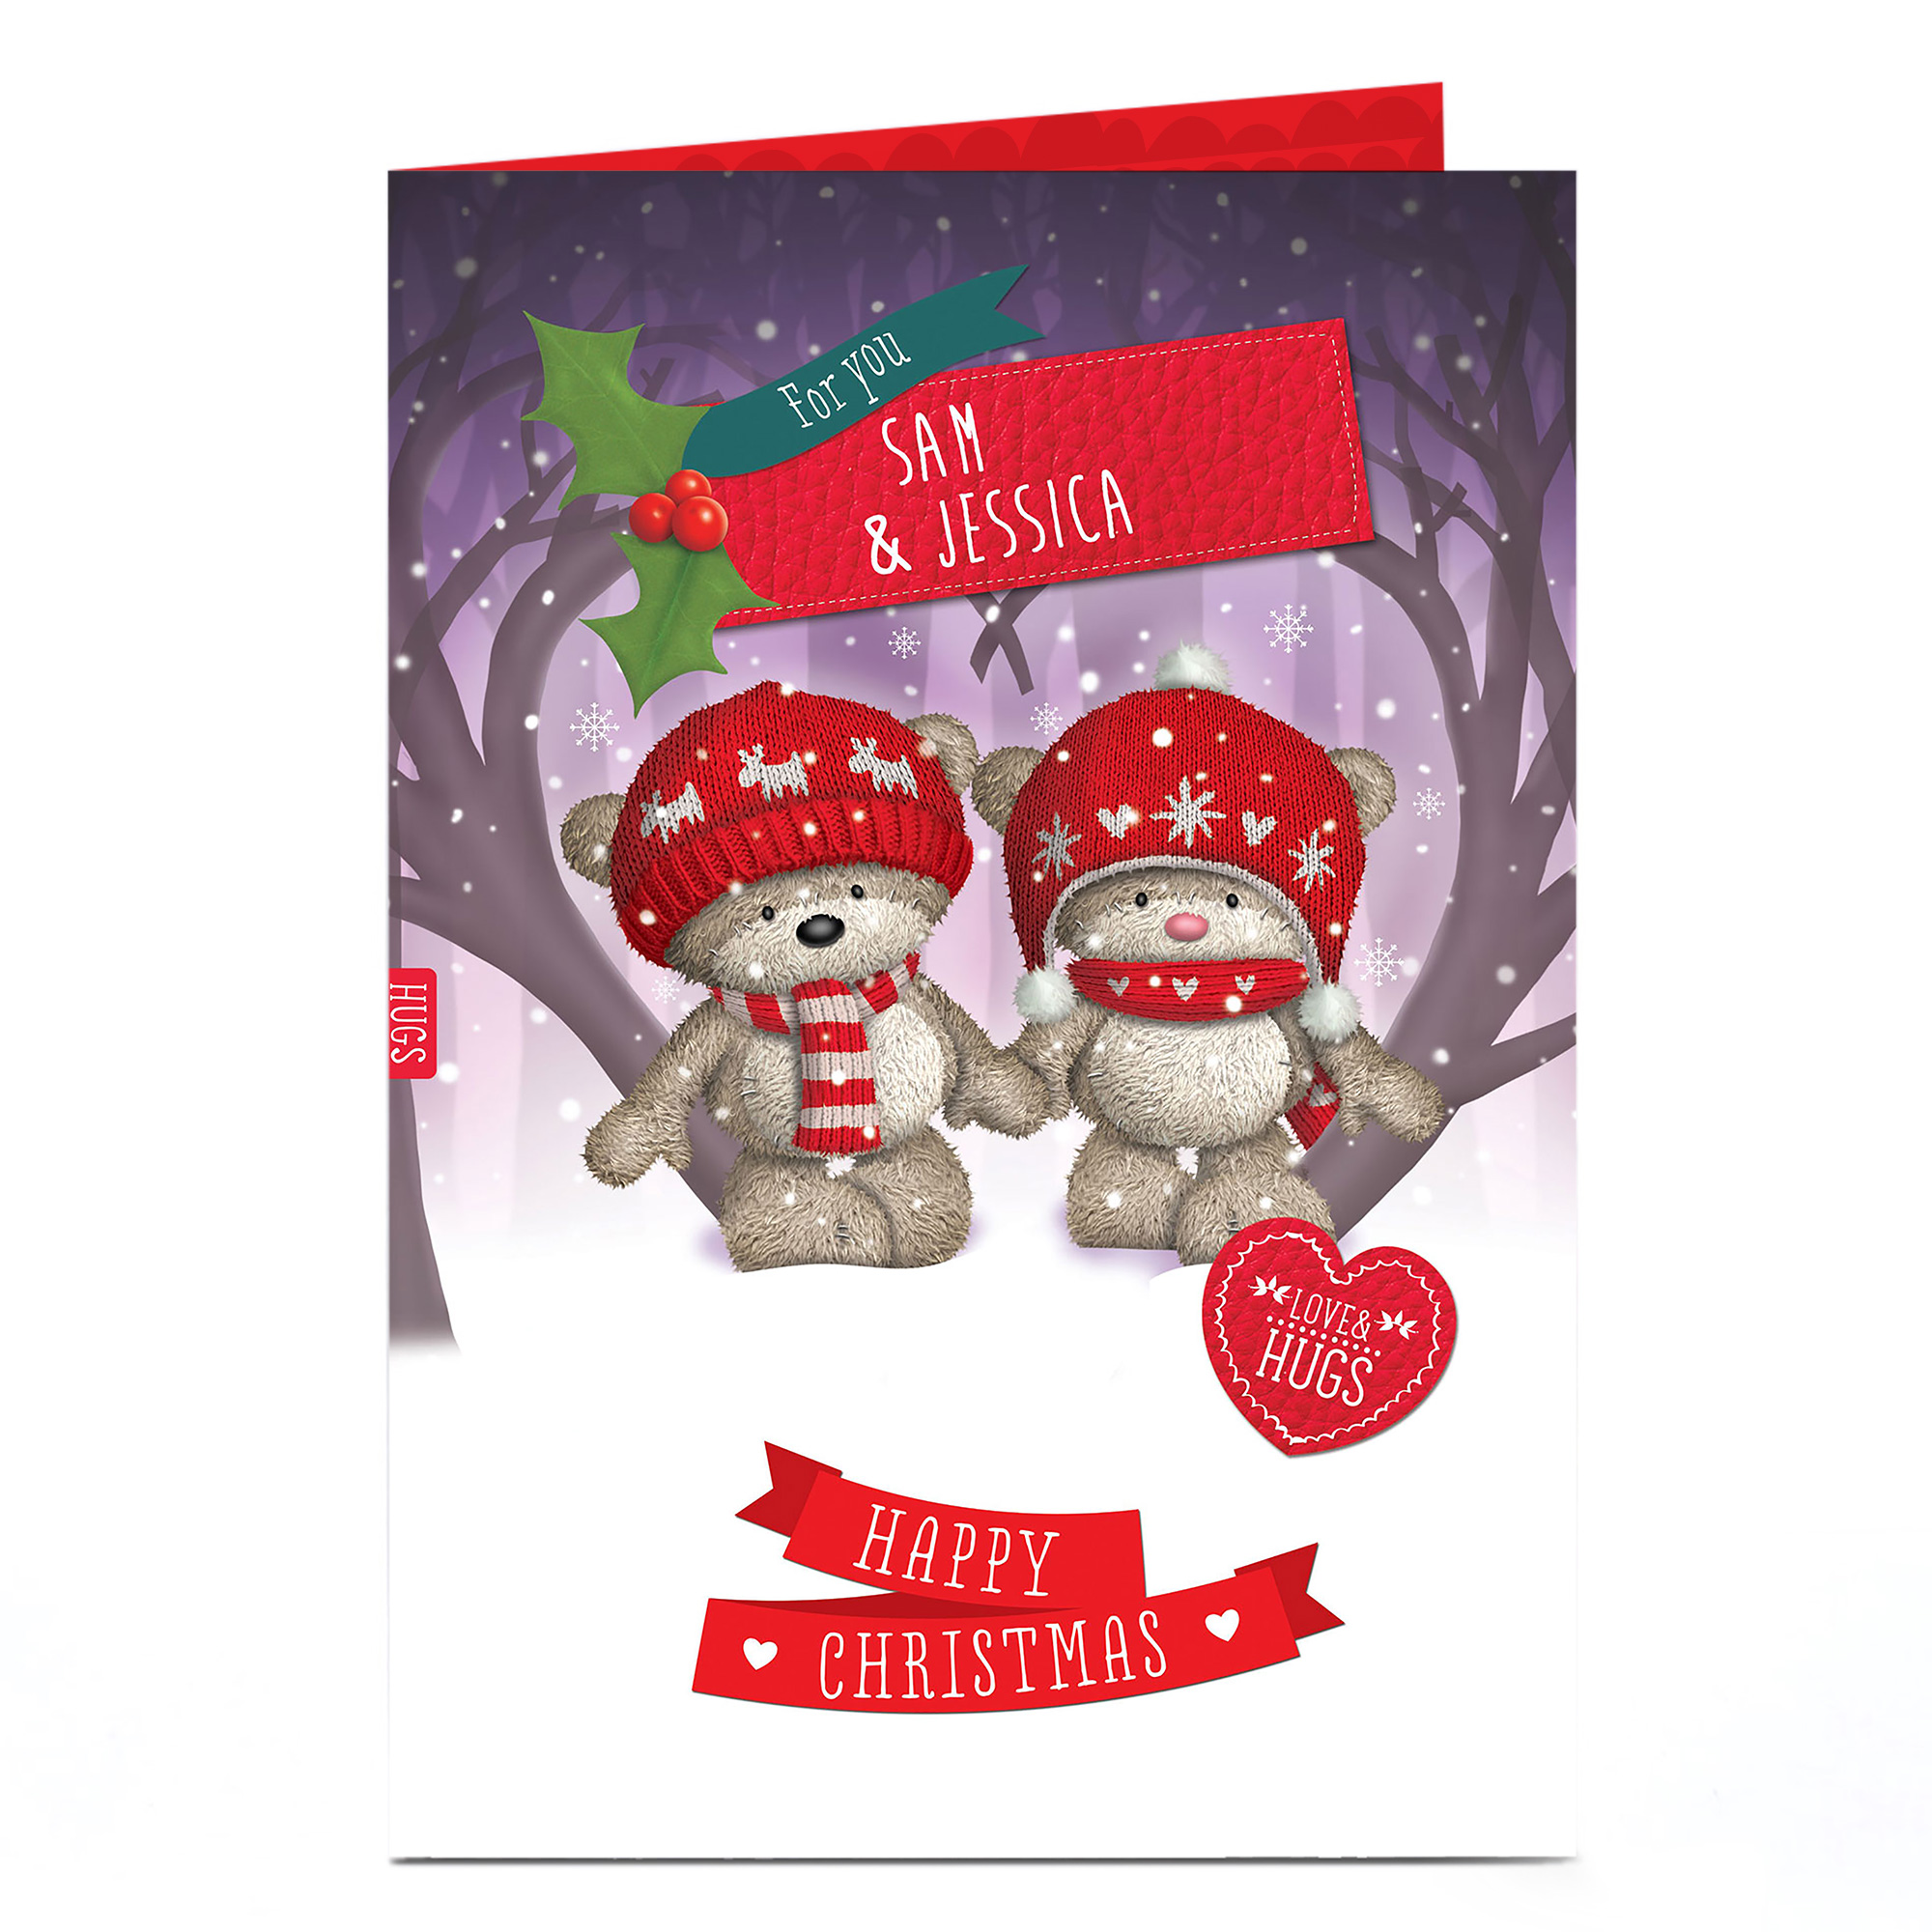 Personalised Hugs Bear Christmas Card - Couple In Snow